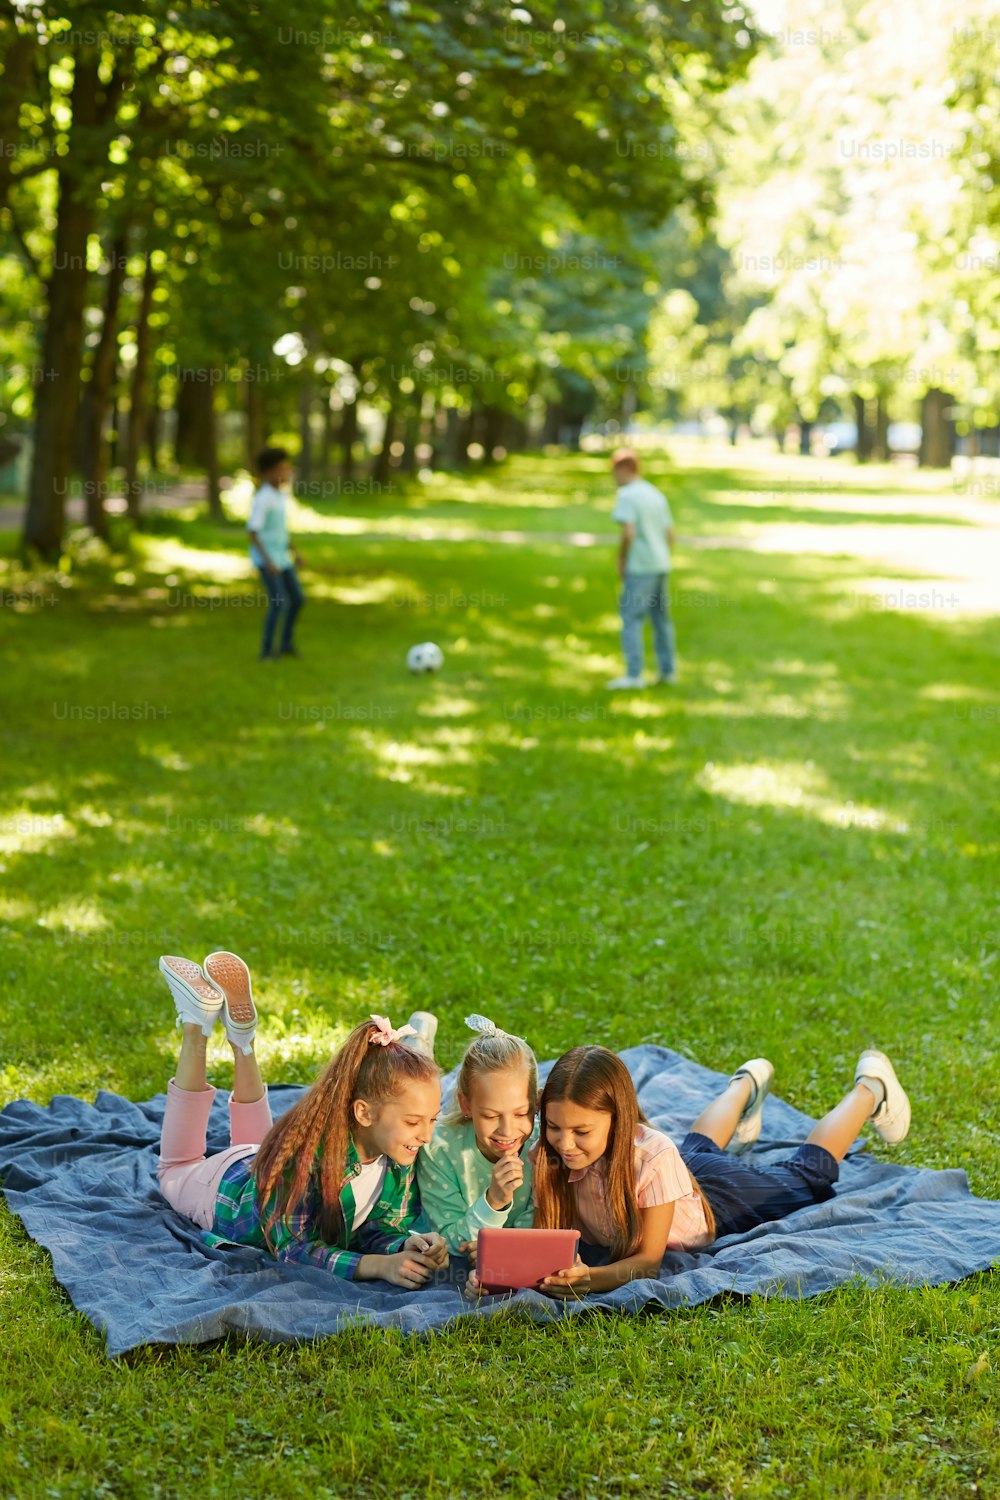 Vertical full length portrait of three teenage girls using digital tablet while lying on green grass in park outdoors lit by sunlight, copy space